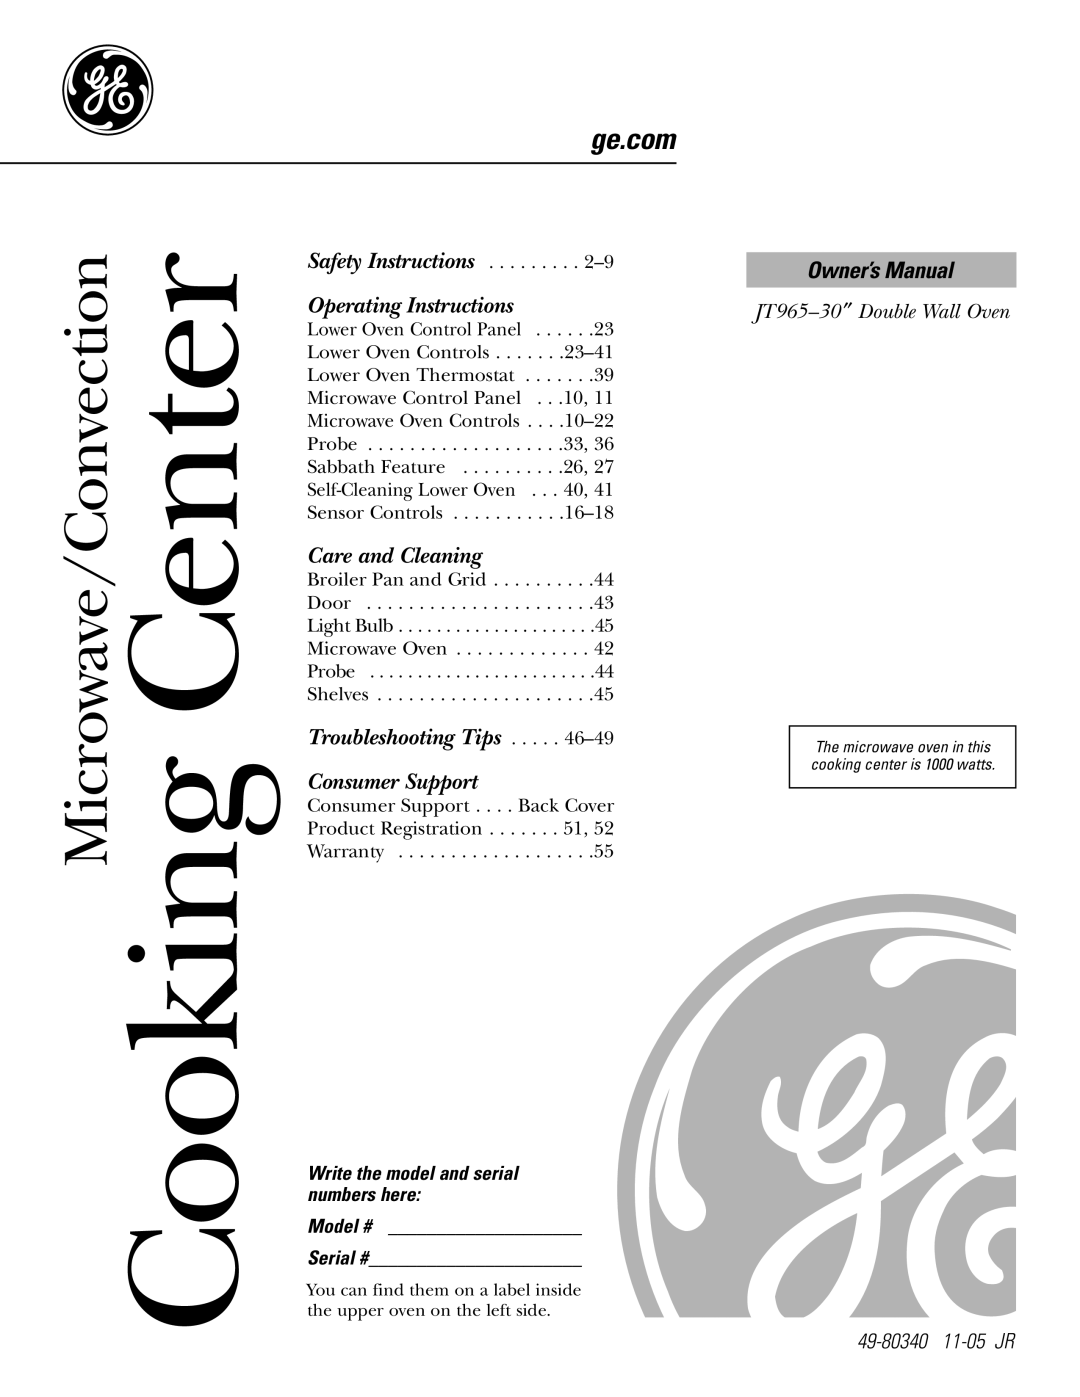 GE JT96530 manual ge.com, Write the model and serial numbers here Model # Serial #, Cooking Center, Operating Instructions 